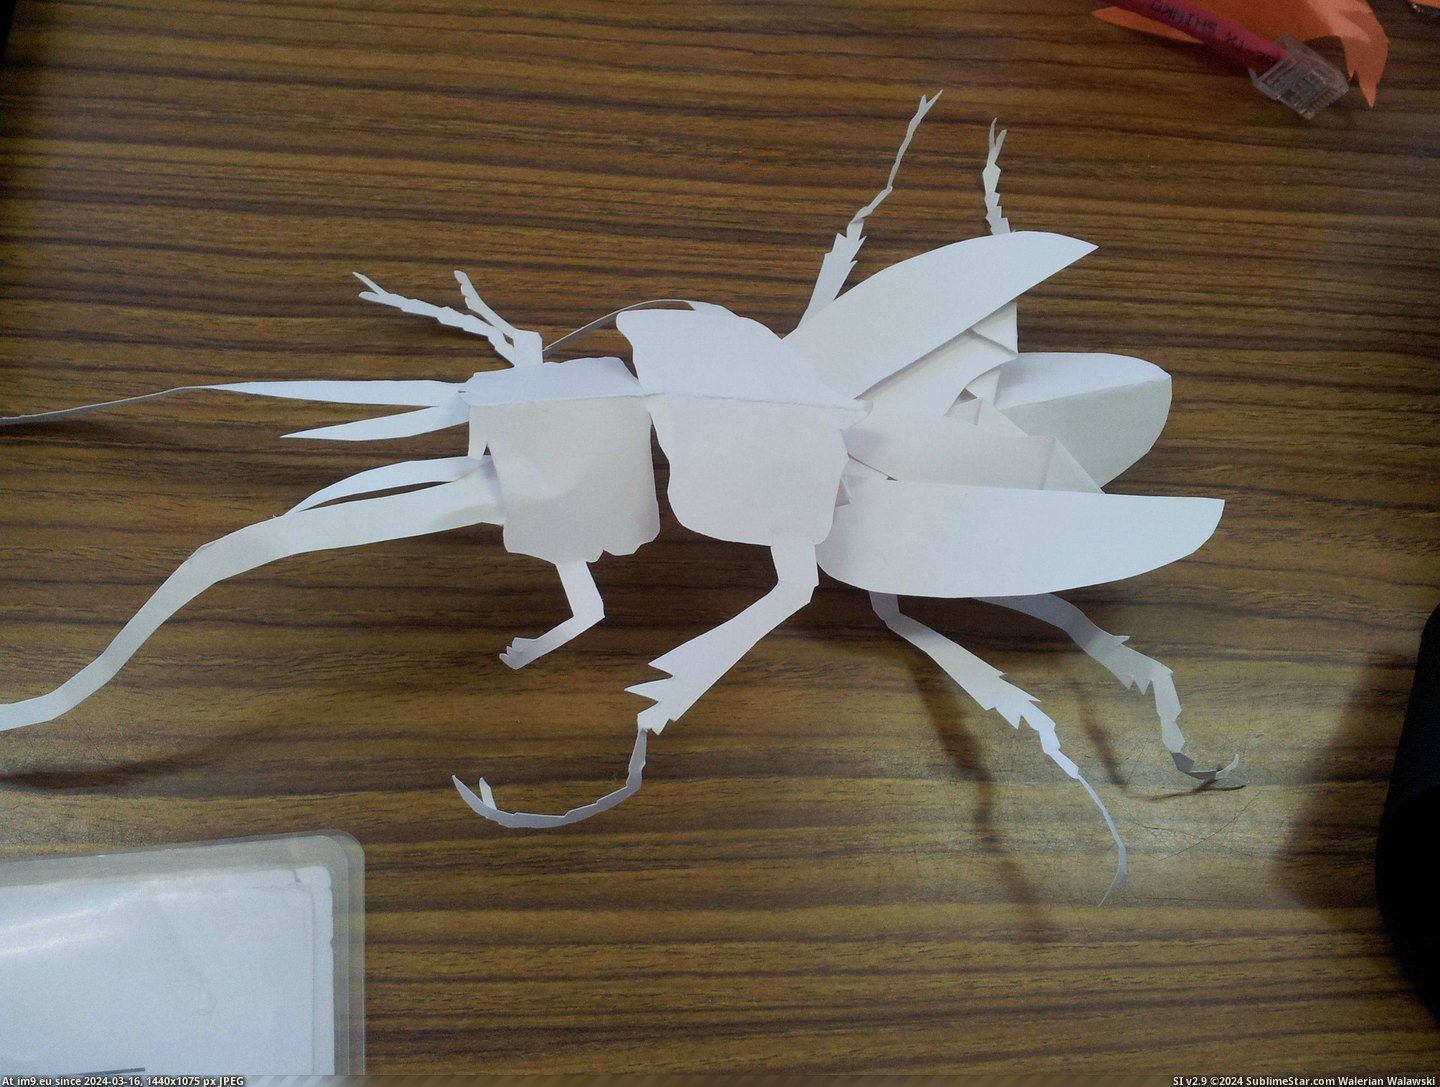 #One #Paper #Students #Creatures #Freehand #Bored #Completely [Pics] One of my students makes these creatures out of paper completely freehand whenever he is bored 1 Pic. (Изображение из альбом My r/PICS favs))